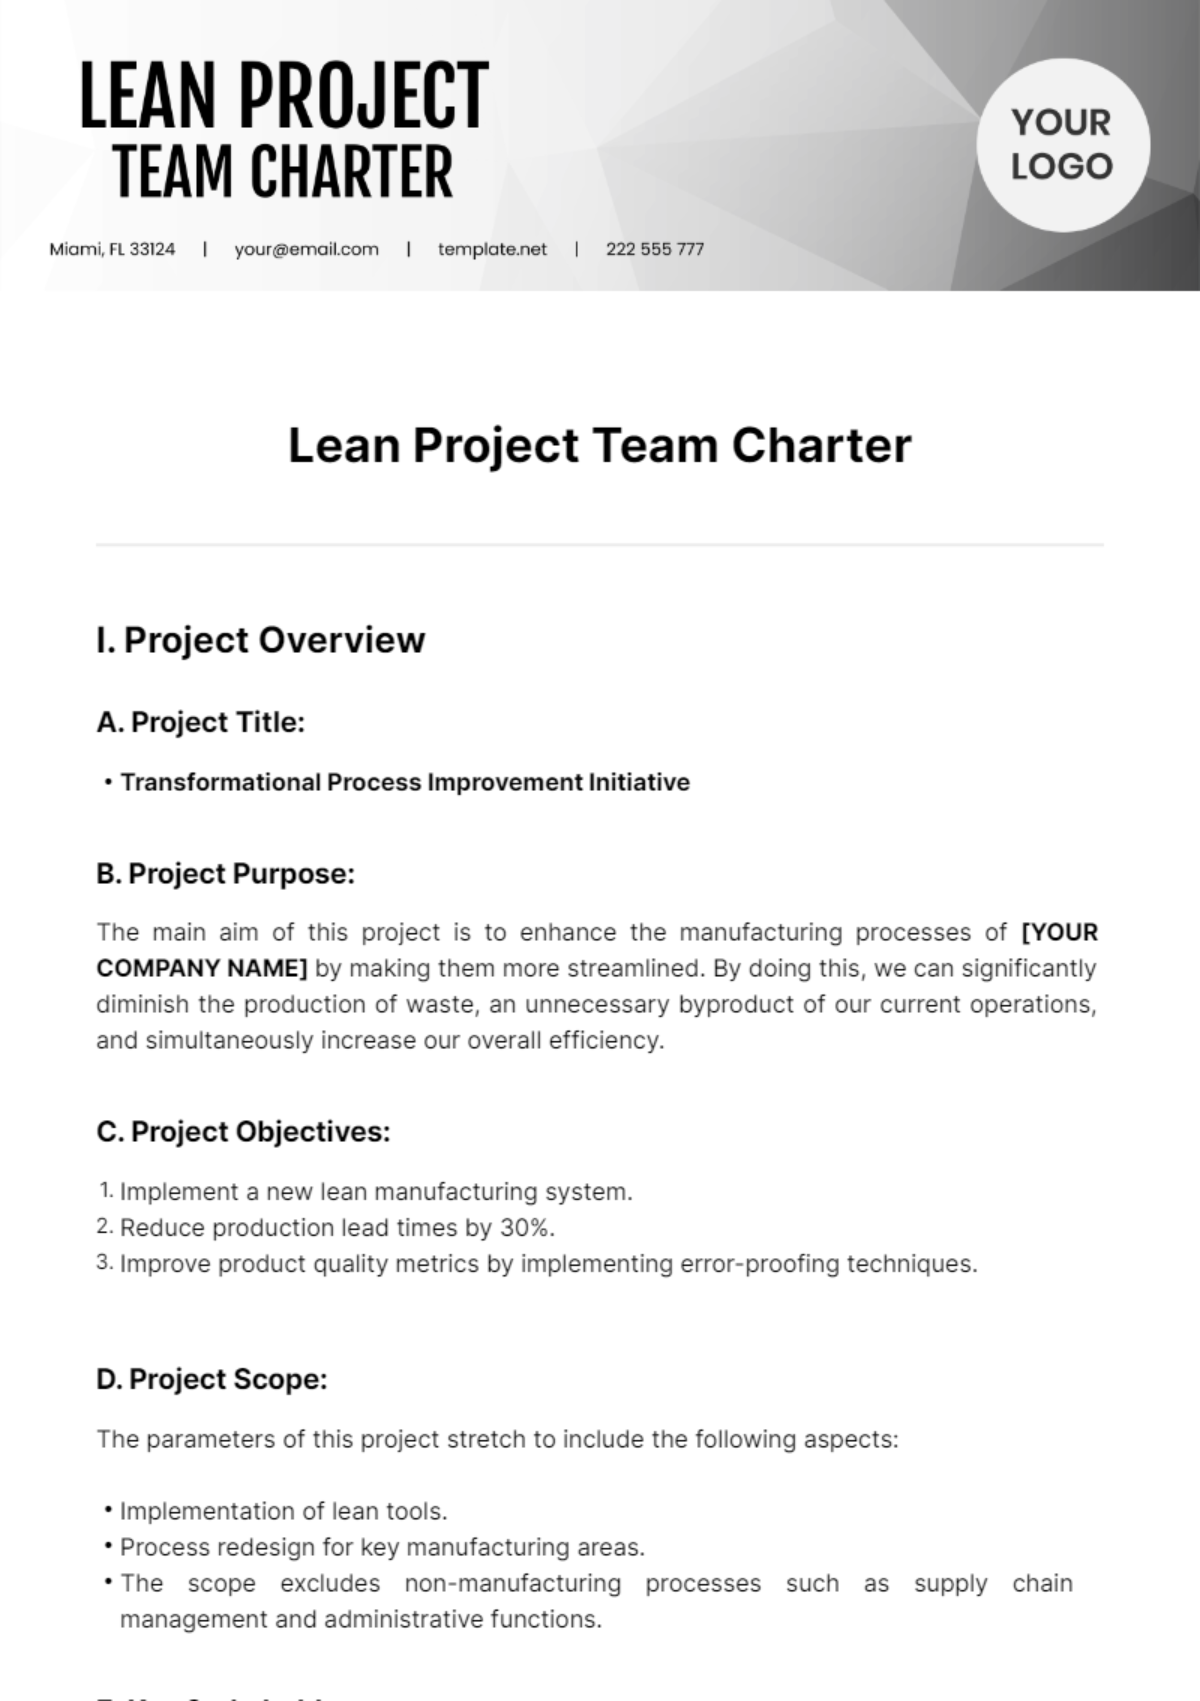 Lean Project Team Charter Template